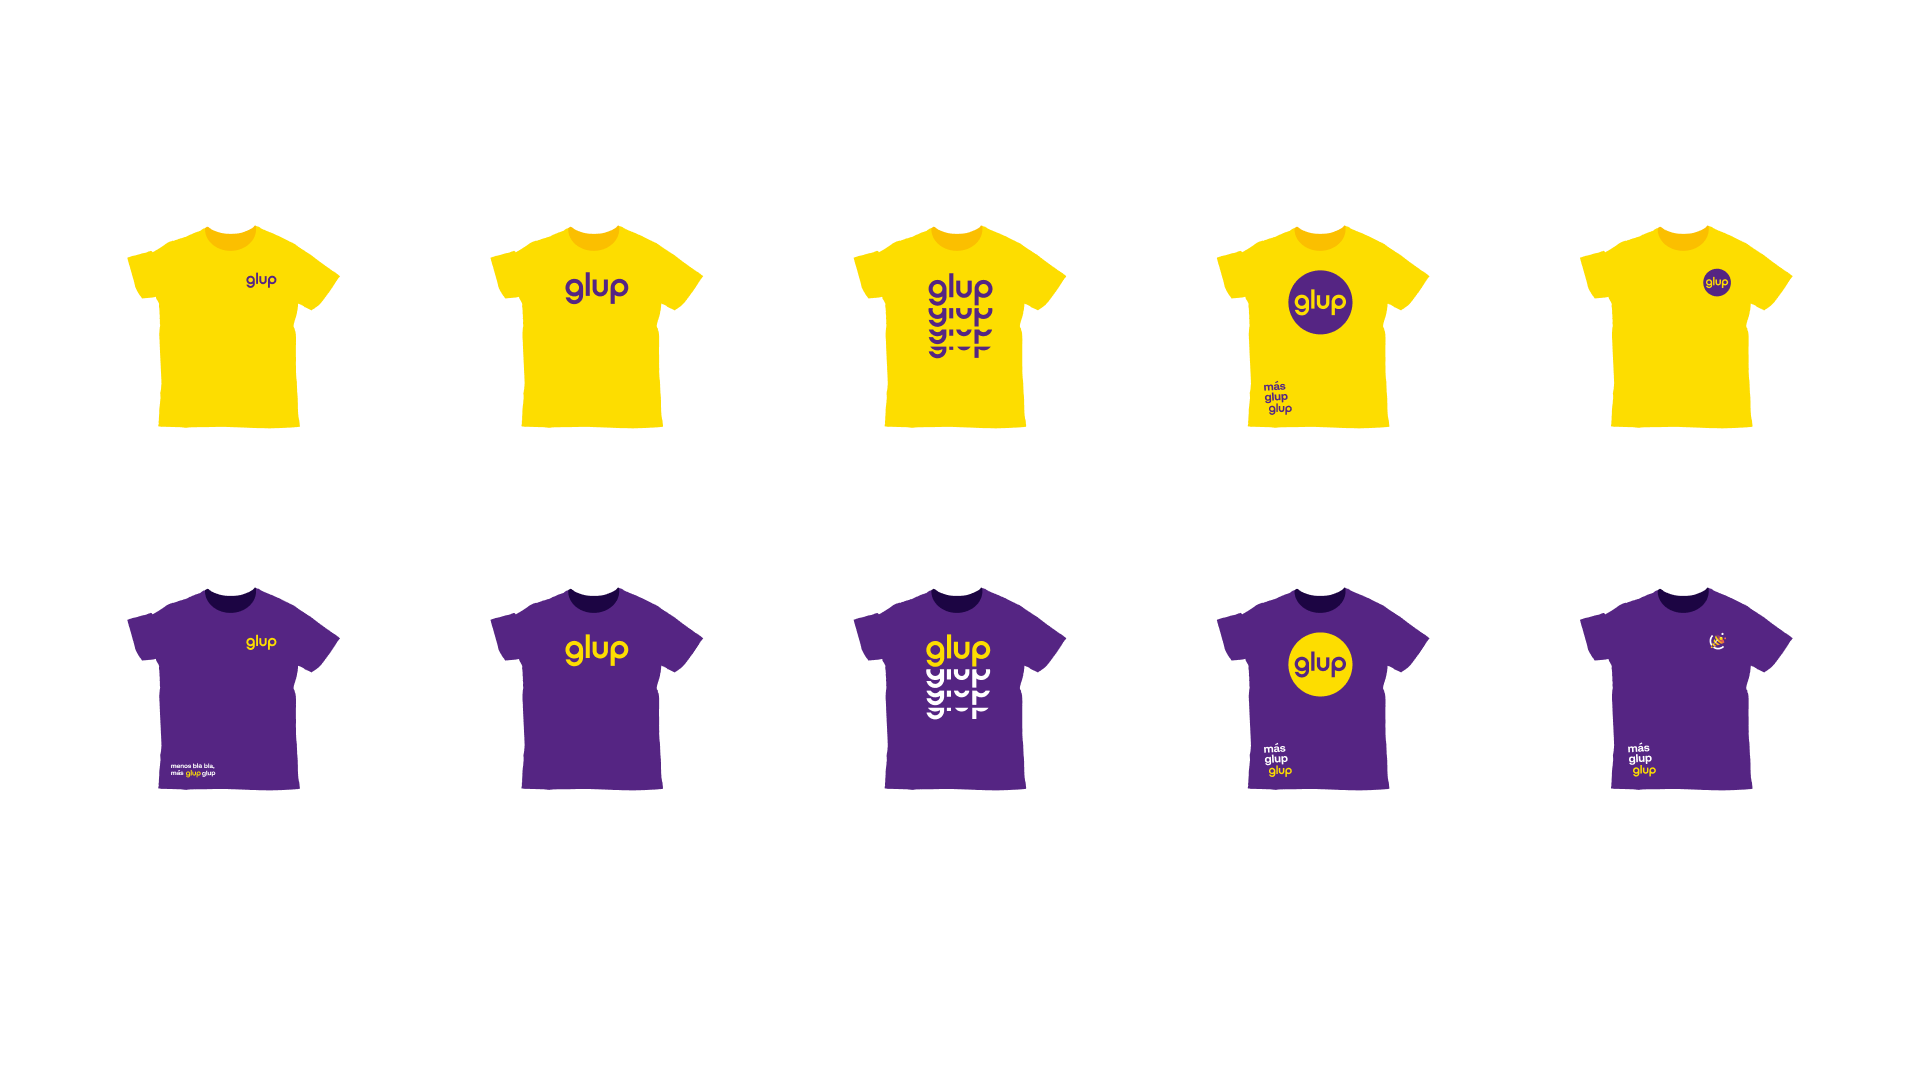 glup-delivery-app-branding-case-study-tshirts-design